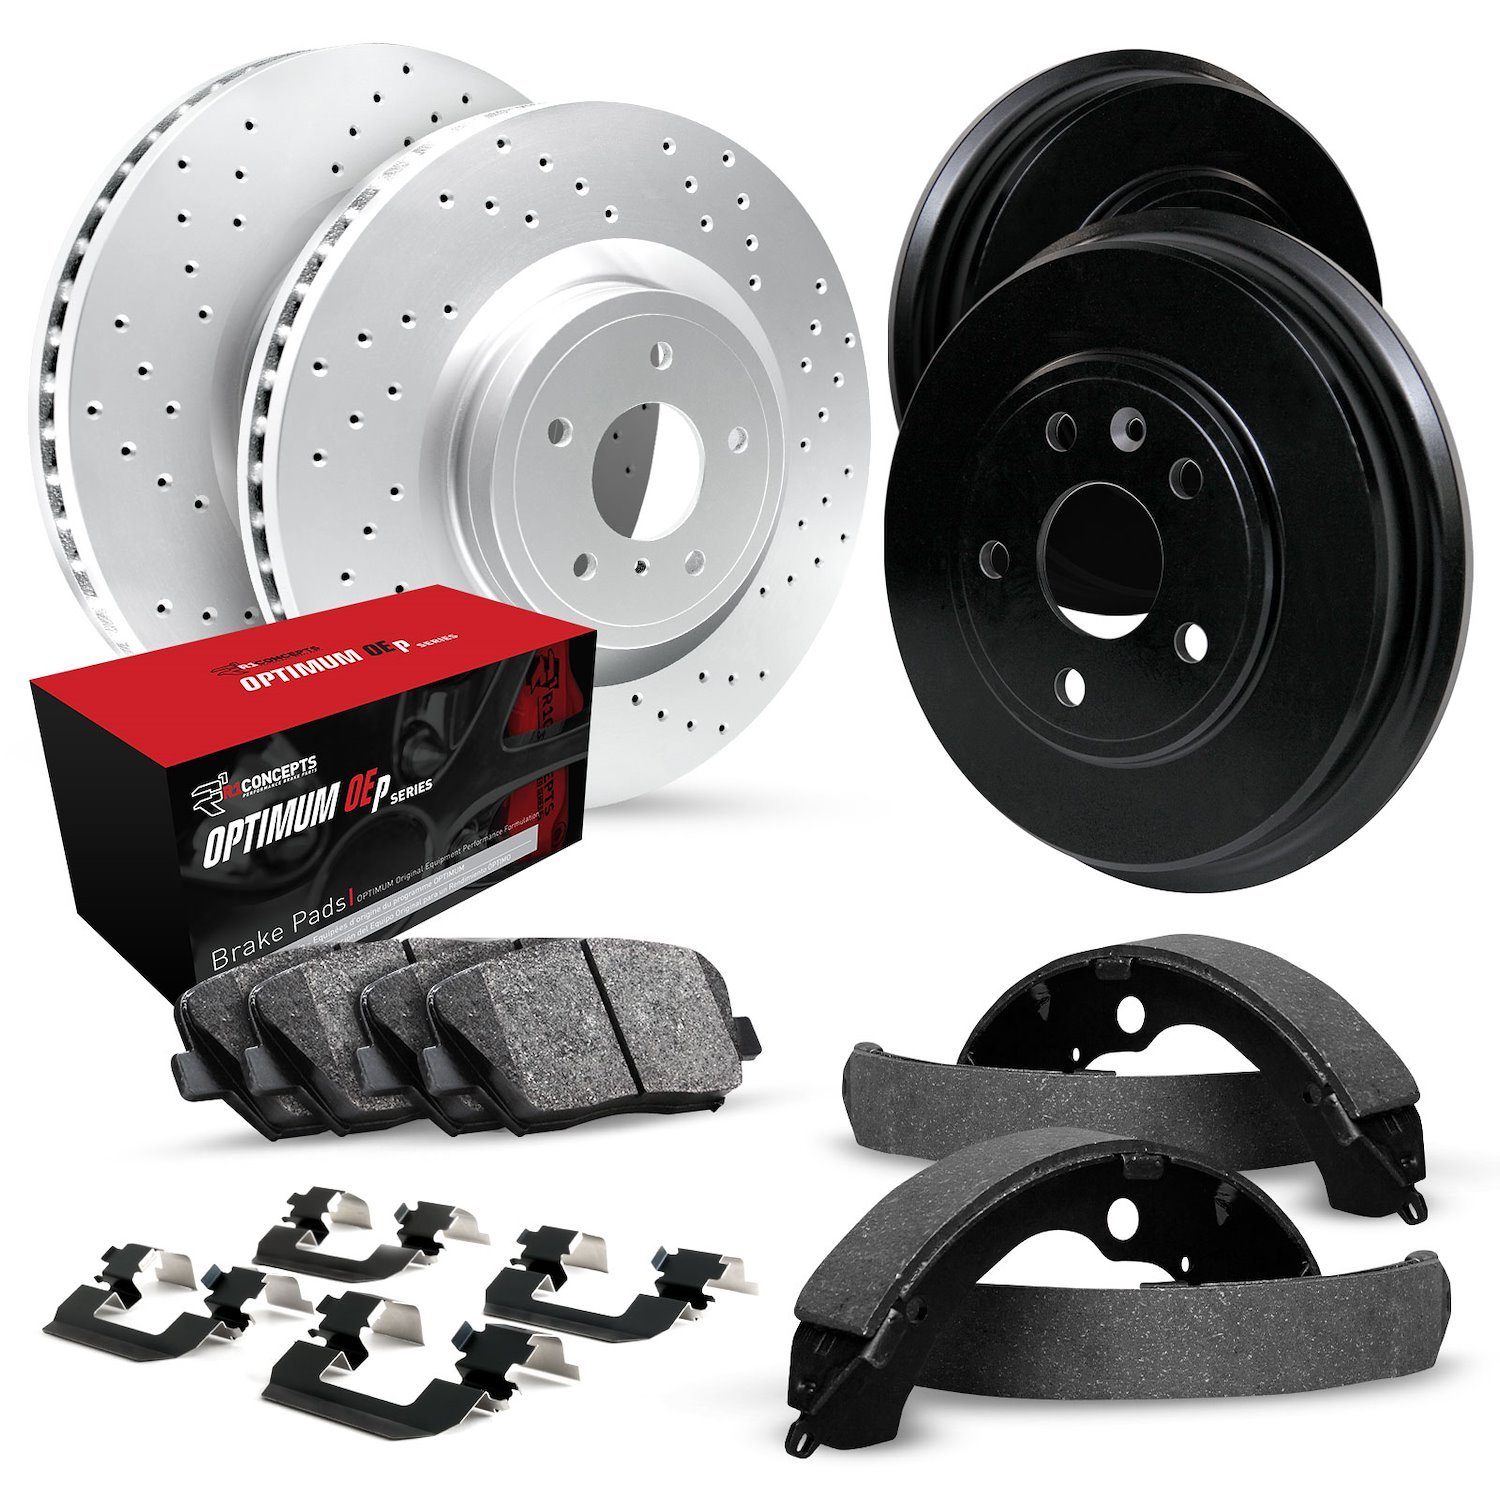 GEO-Carbon Drilled Brake Rotor & Drum Set w/Optimum OE Pads, Shoes, & Hardware, 1983-1984 GM, Position: Front & Rear